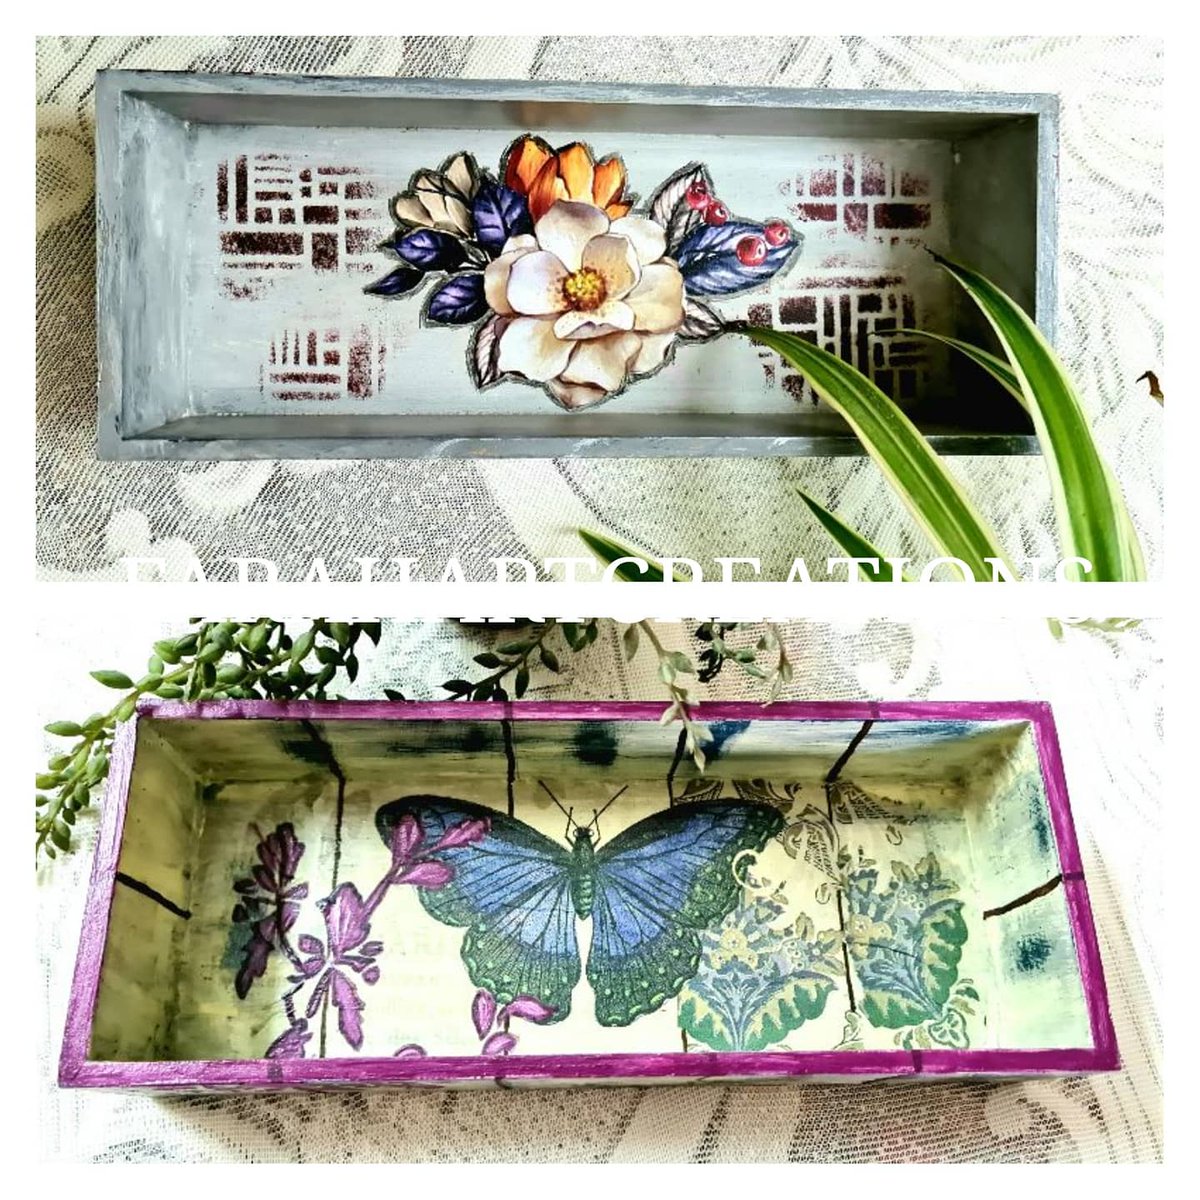 Another addition to the narrow tray collection. Presenting Handcrafted trays for your daily needs. 
Size 10.5x4x1.75 inches
For orders pl message directly.
#farahartcreations #trays #traydecor #handmadetrays #handpaintedtrays #customisedgiftsonline #handmadegifts #customisedgifts